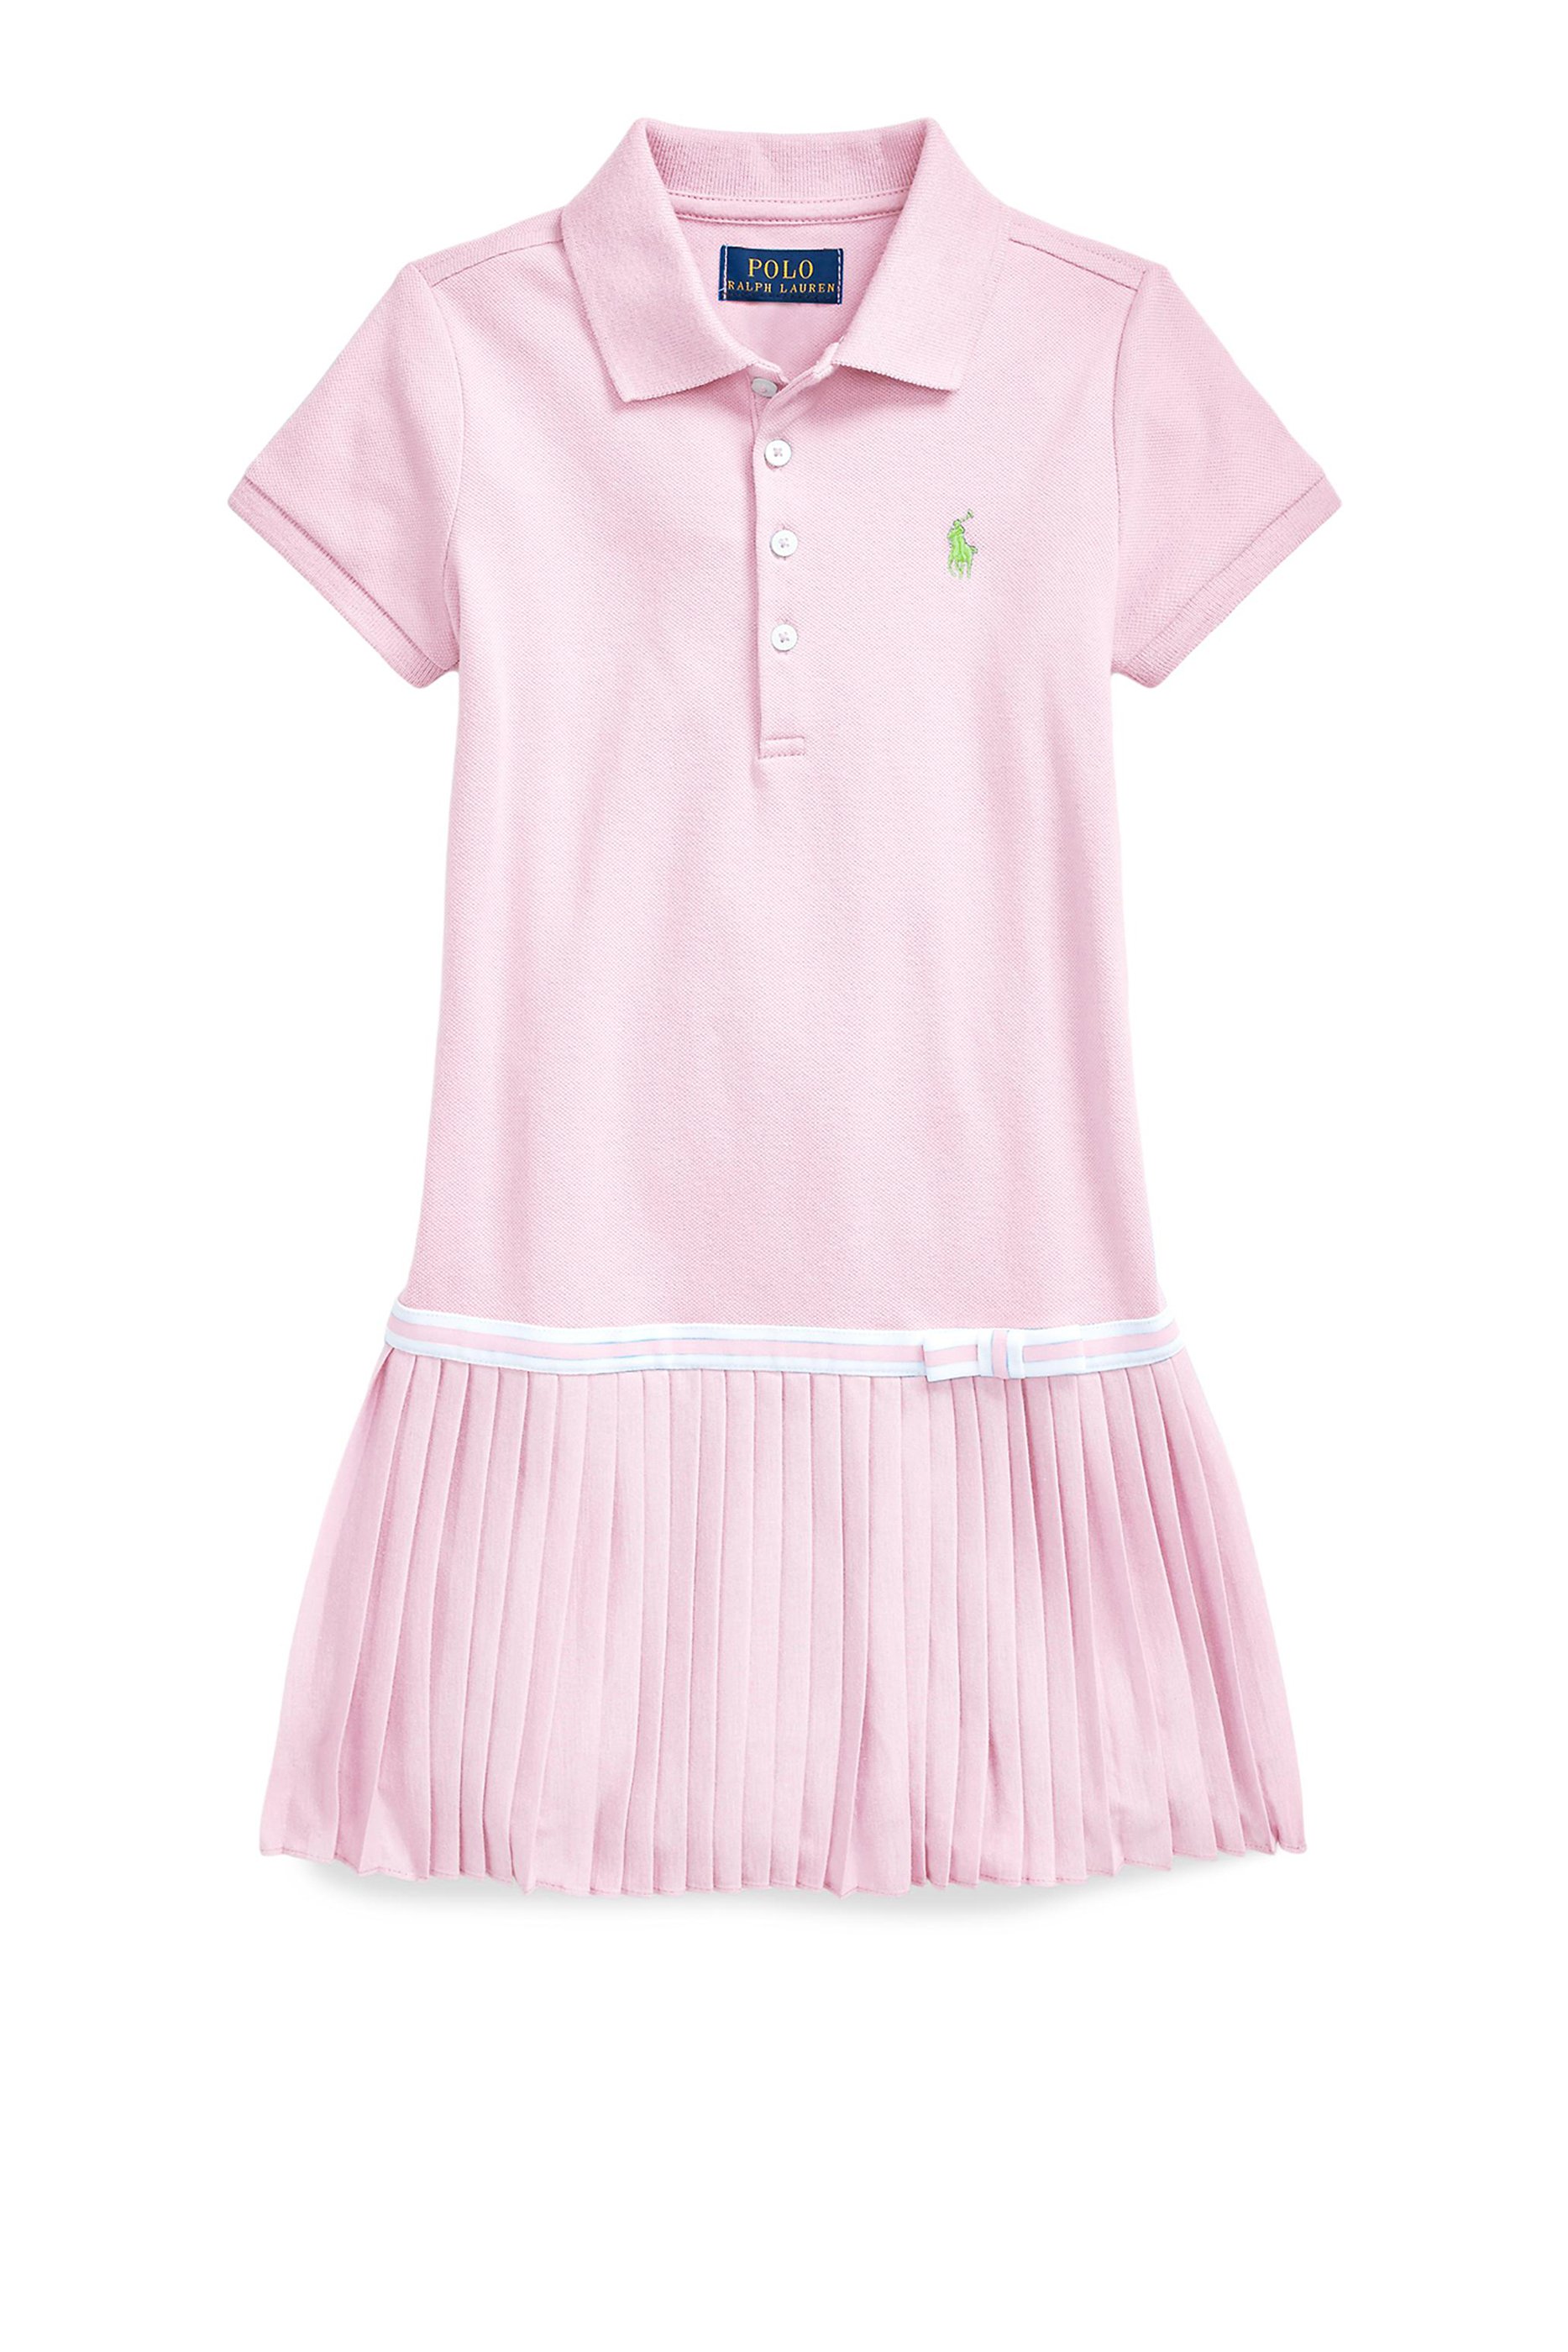 Buy Polo Ralph Lauren Pleated Mesh Polo Dress - Kids for AED 270.00 ...